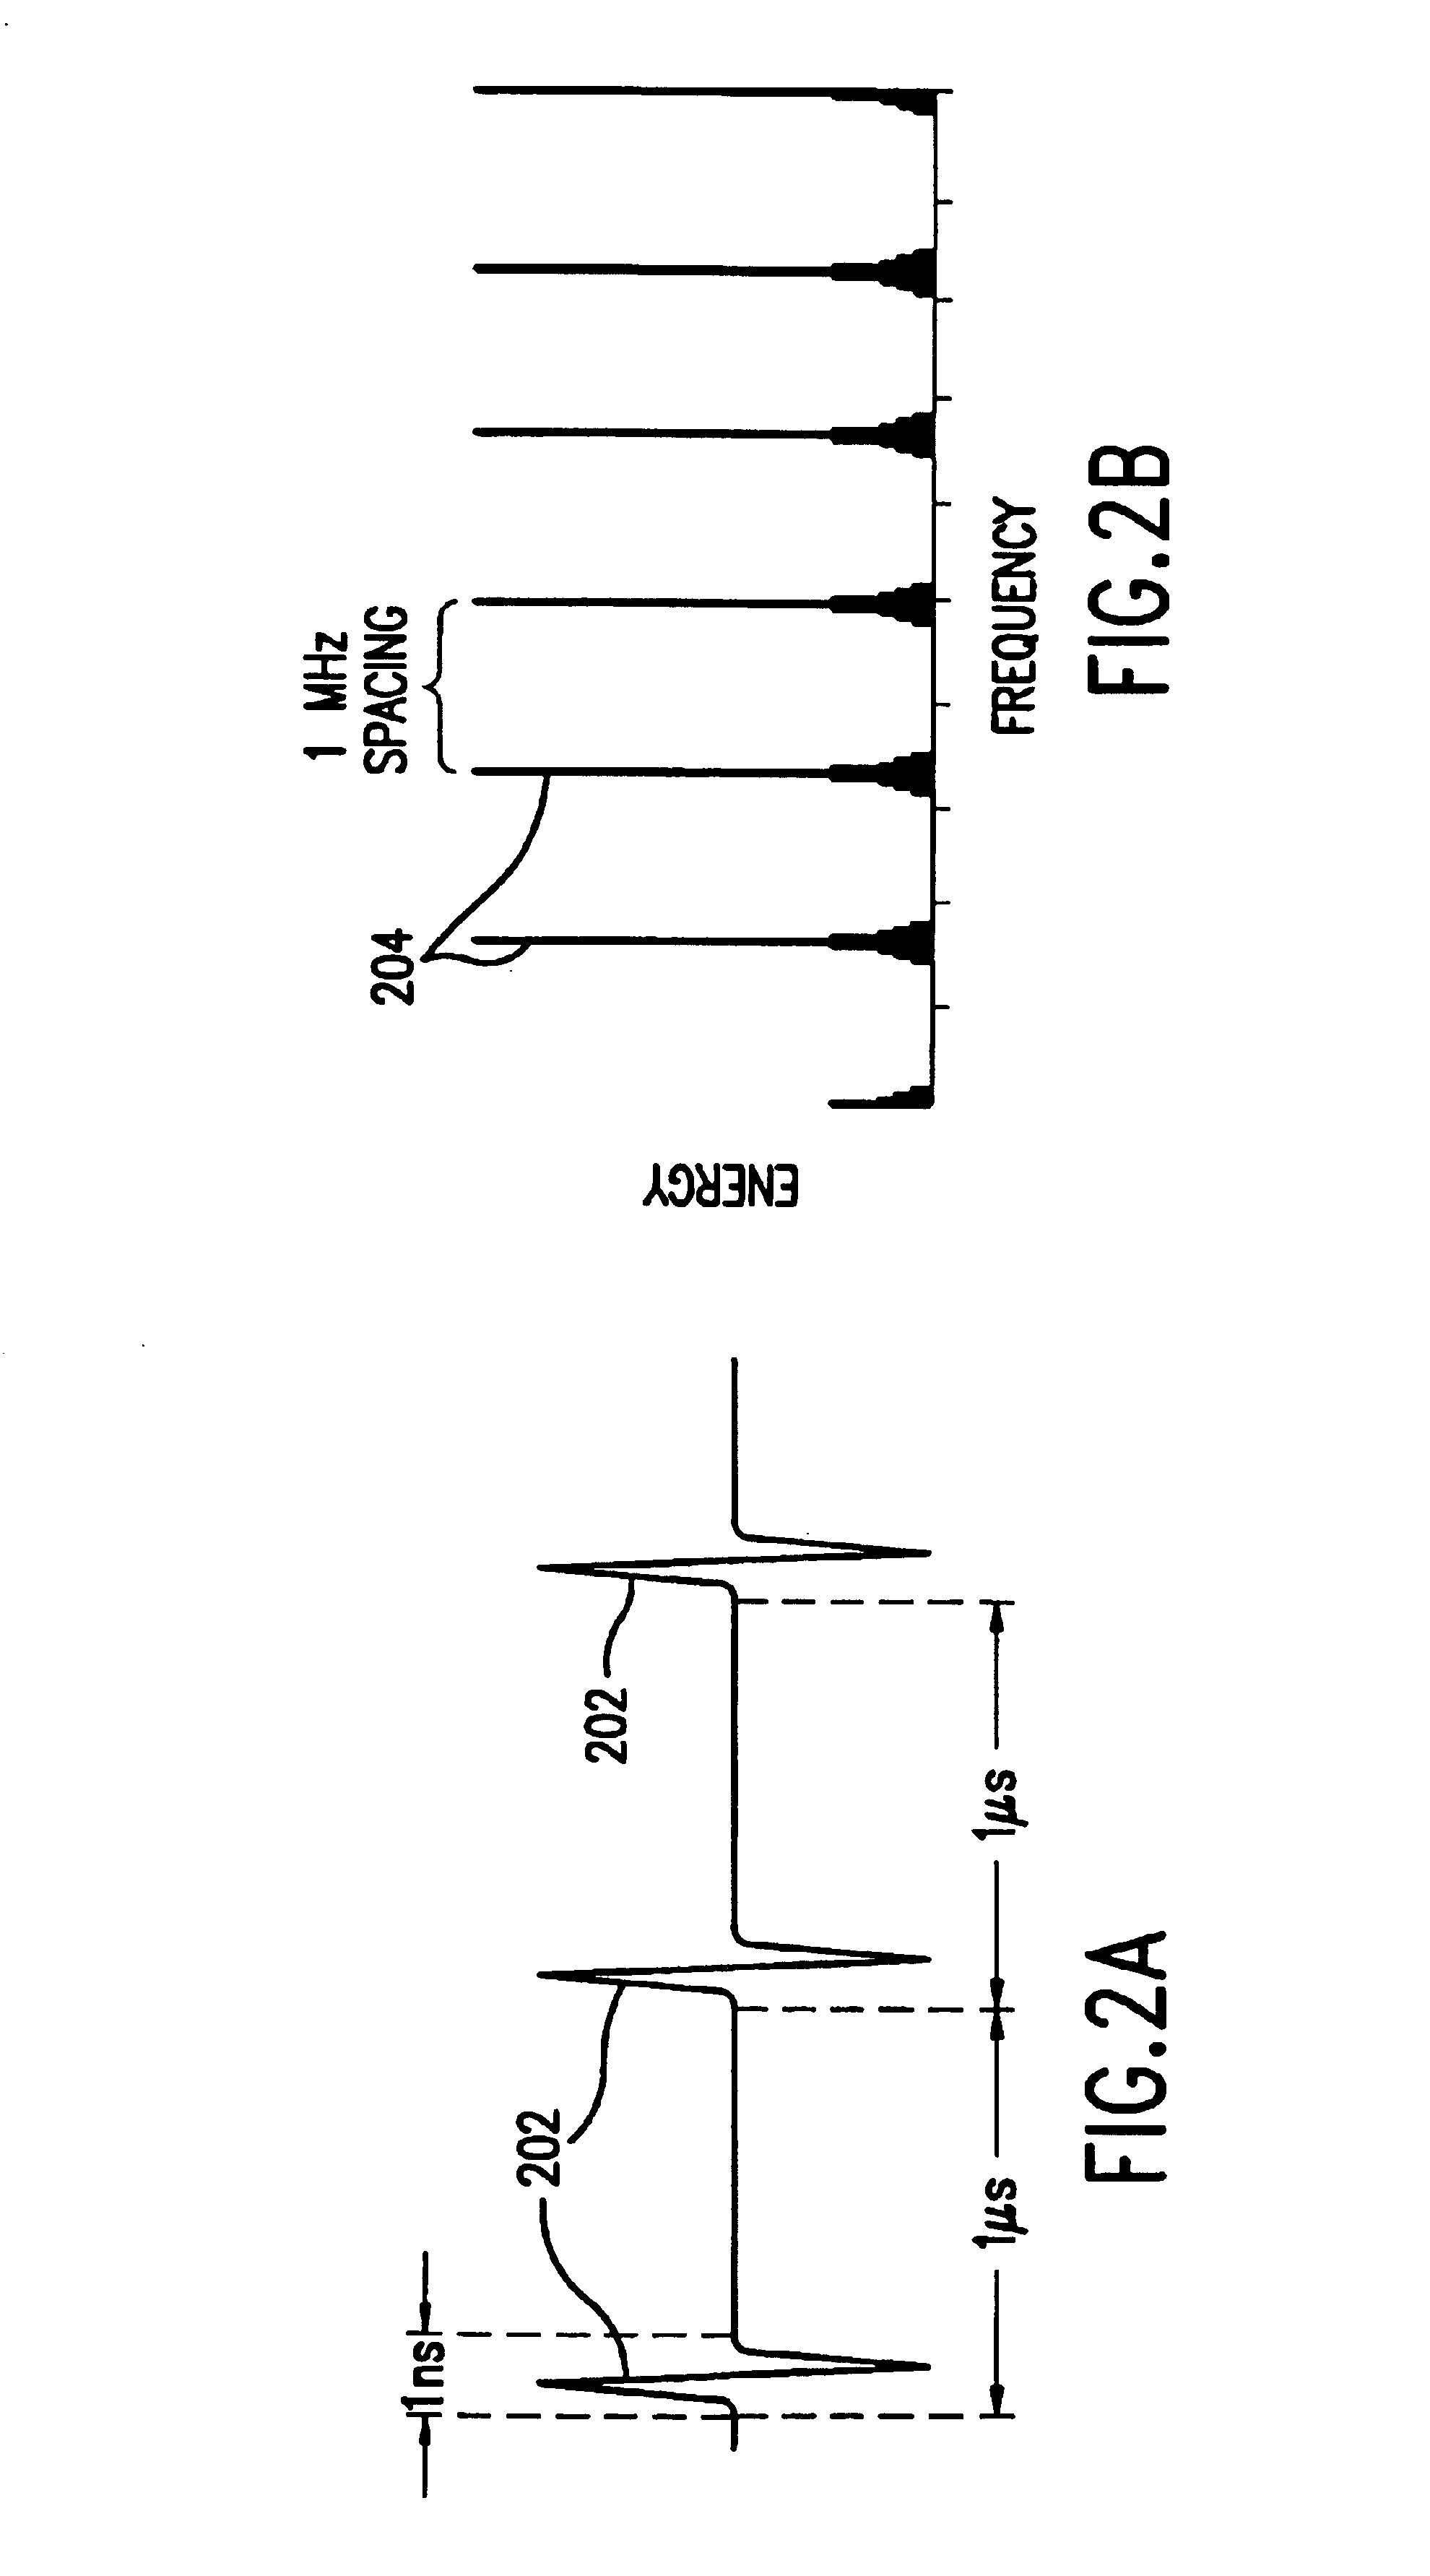 Ultrawide-band communication system and method